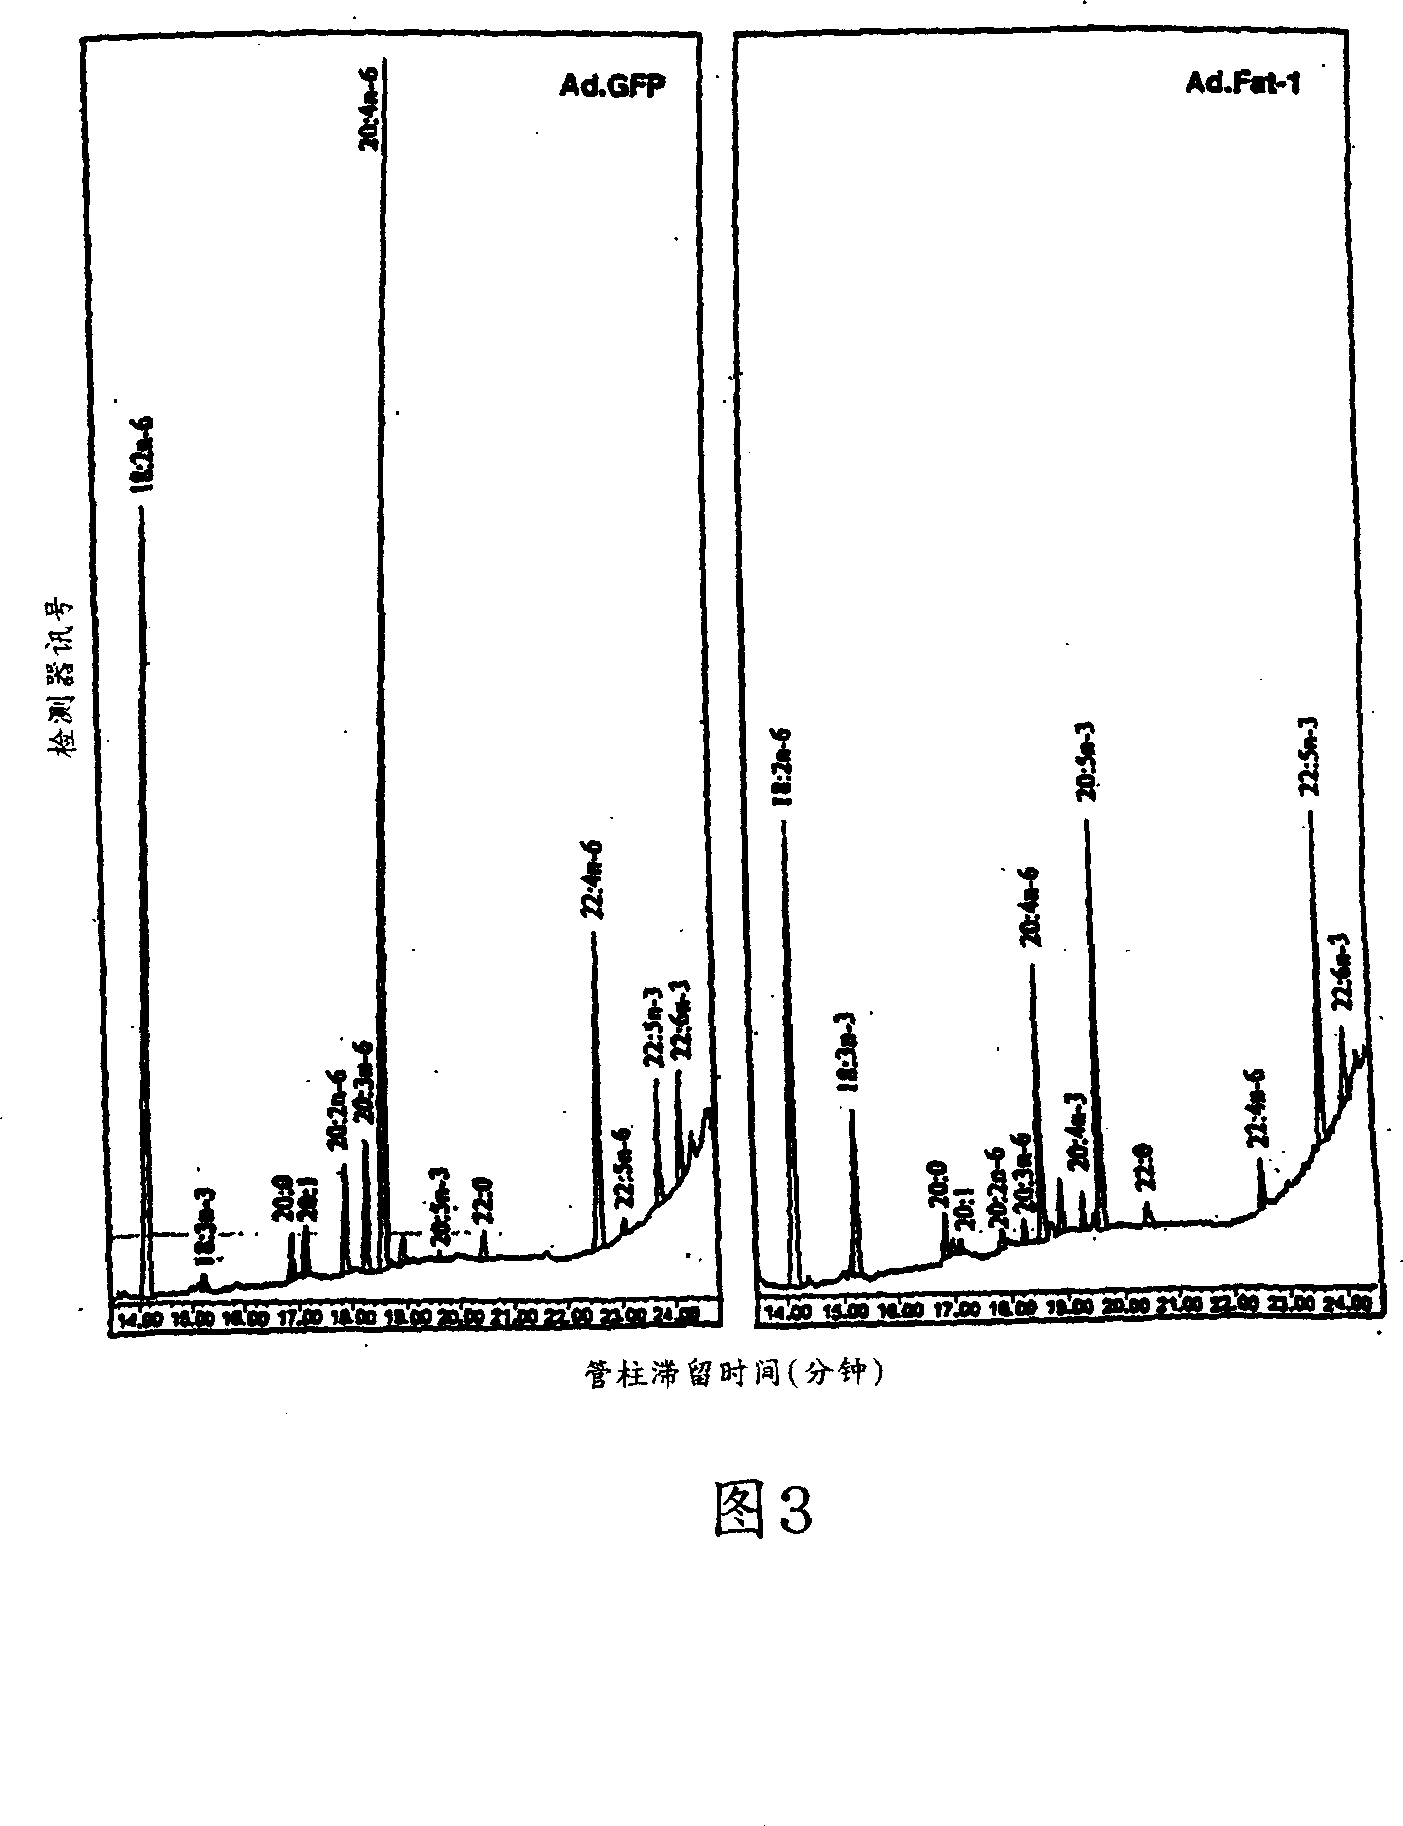 Compositions and methods for modifying the content of polyunsaturated fatty acids in biological cells